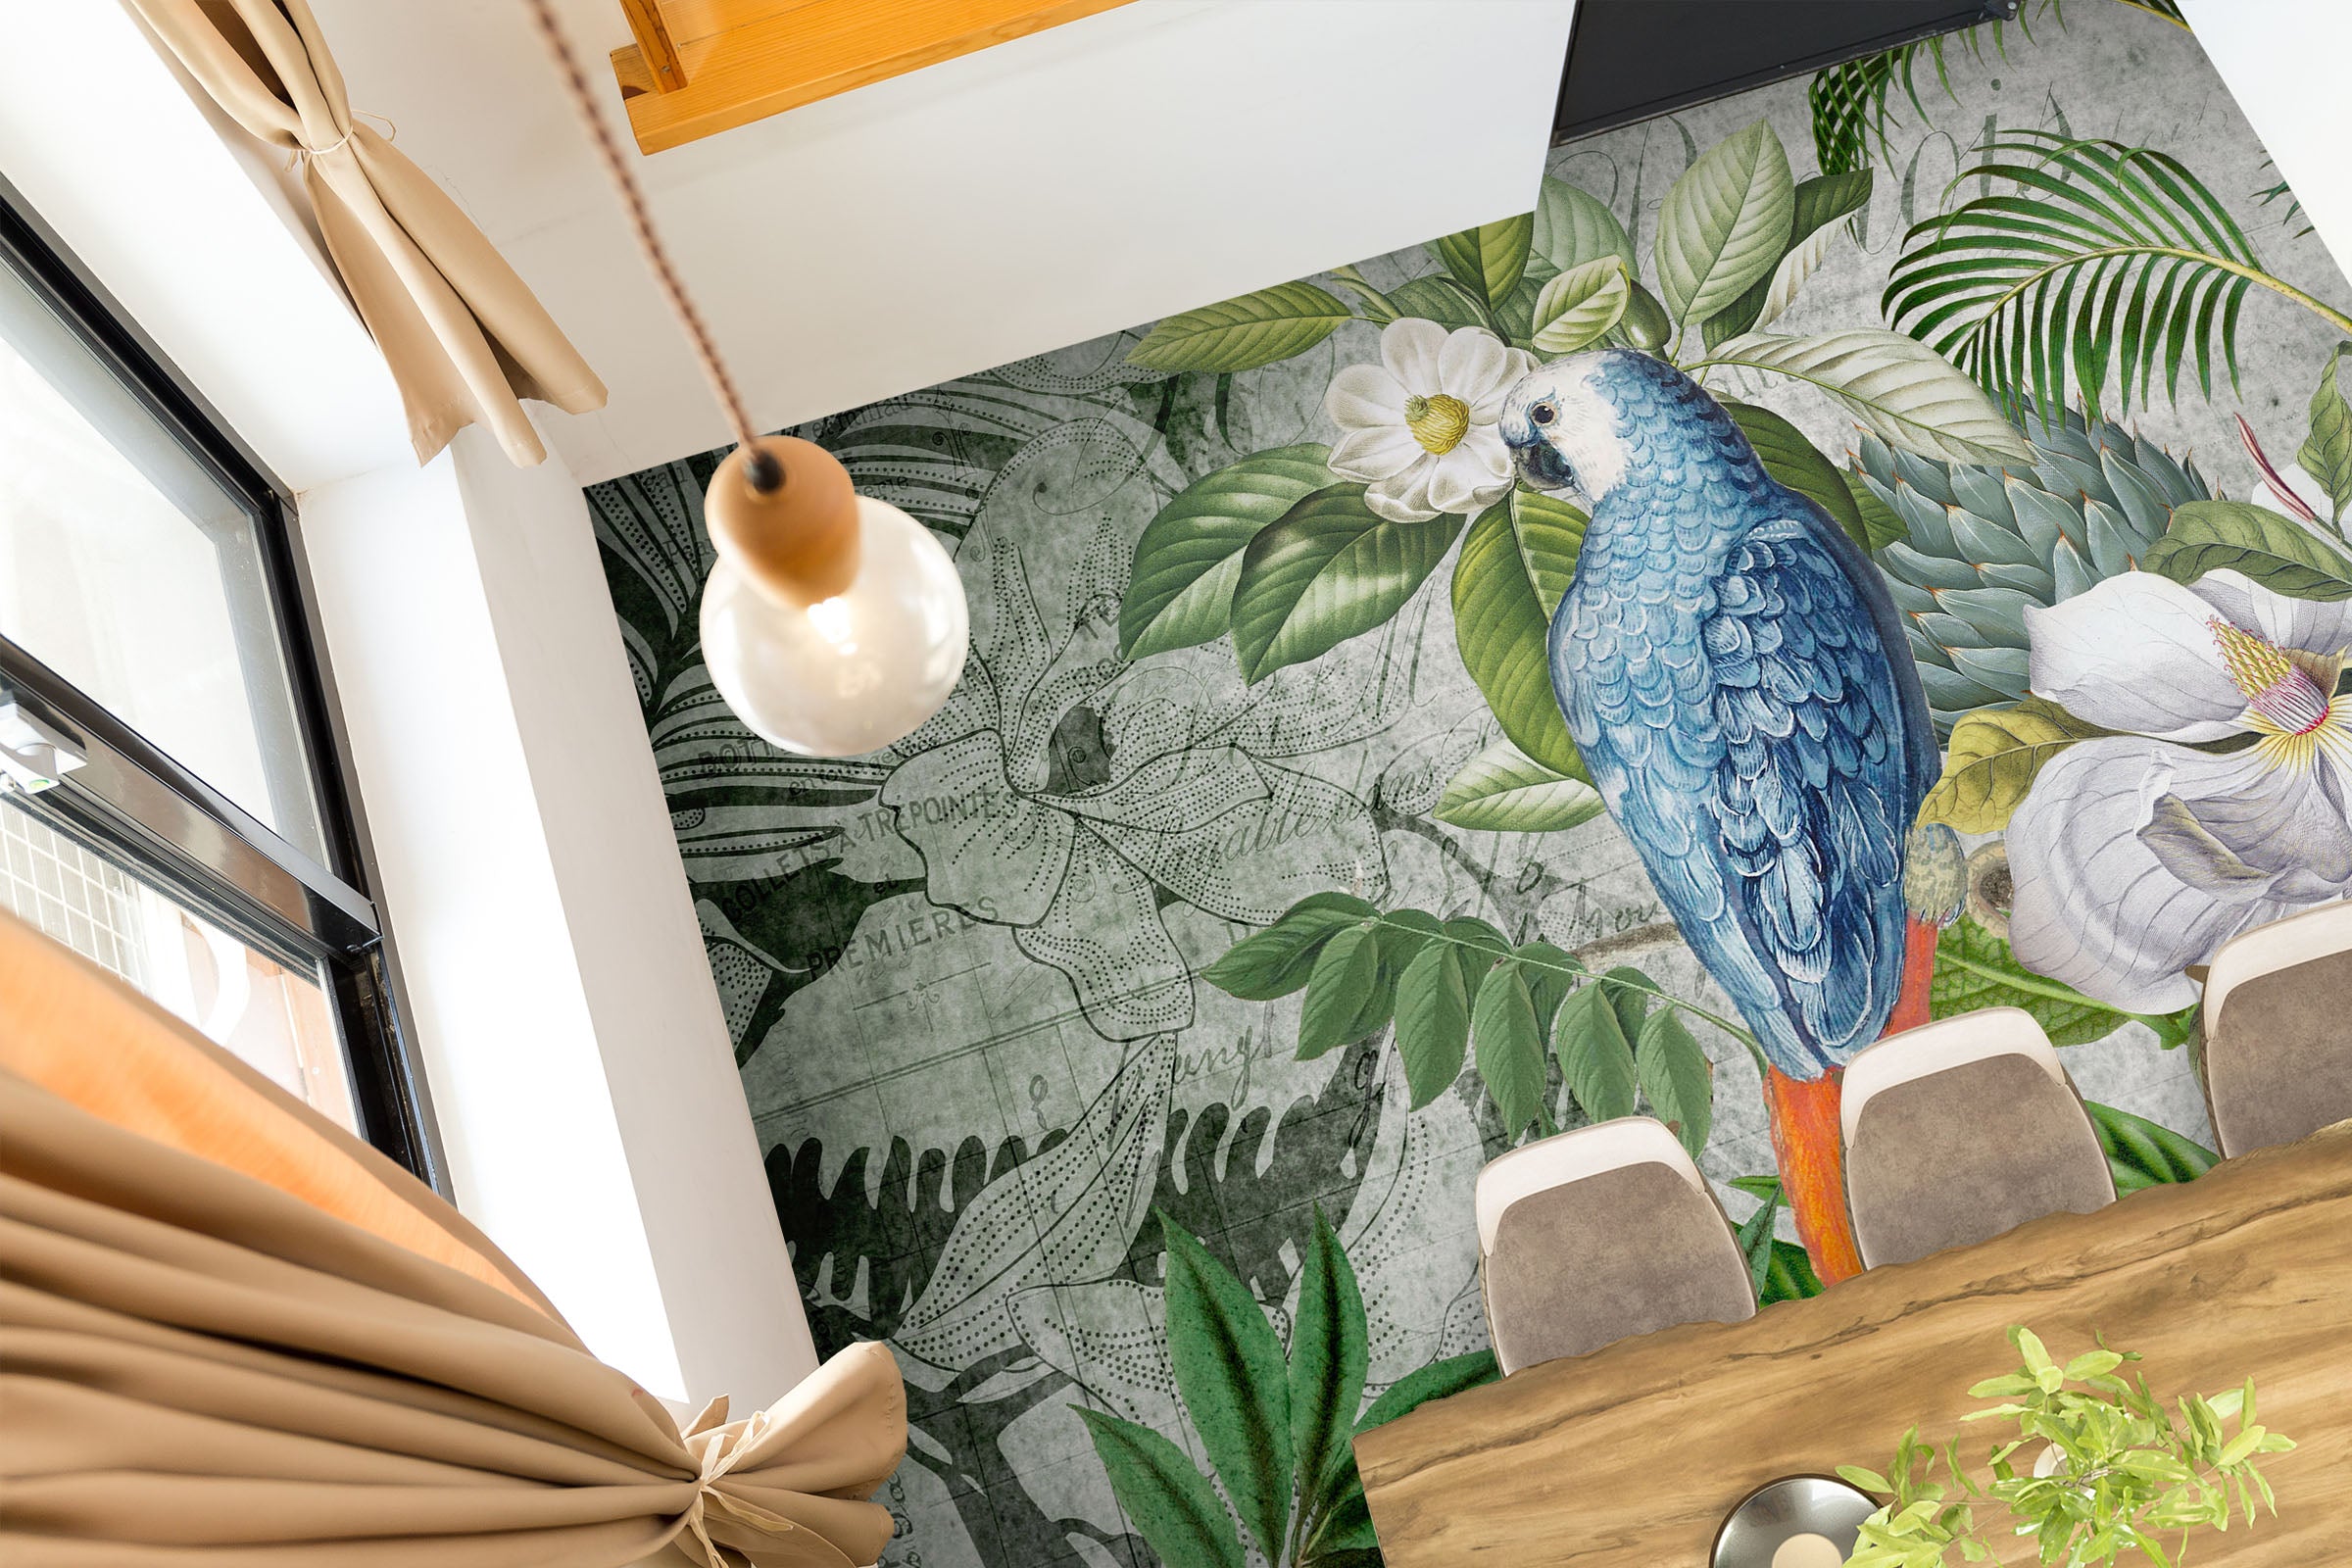 3D Leaves Blue Parrot 104164 Andrea Haase Floor Mural  Wallpaper Murals Self-Adhesive Removable Print Epoxy